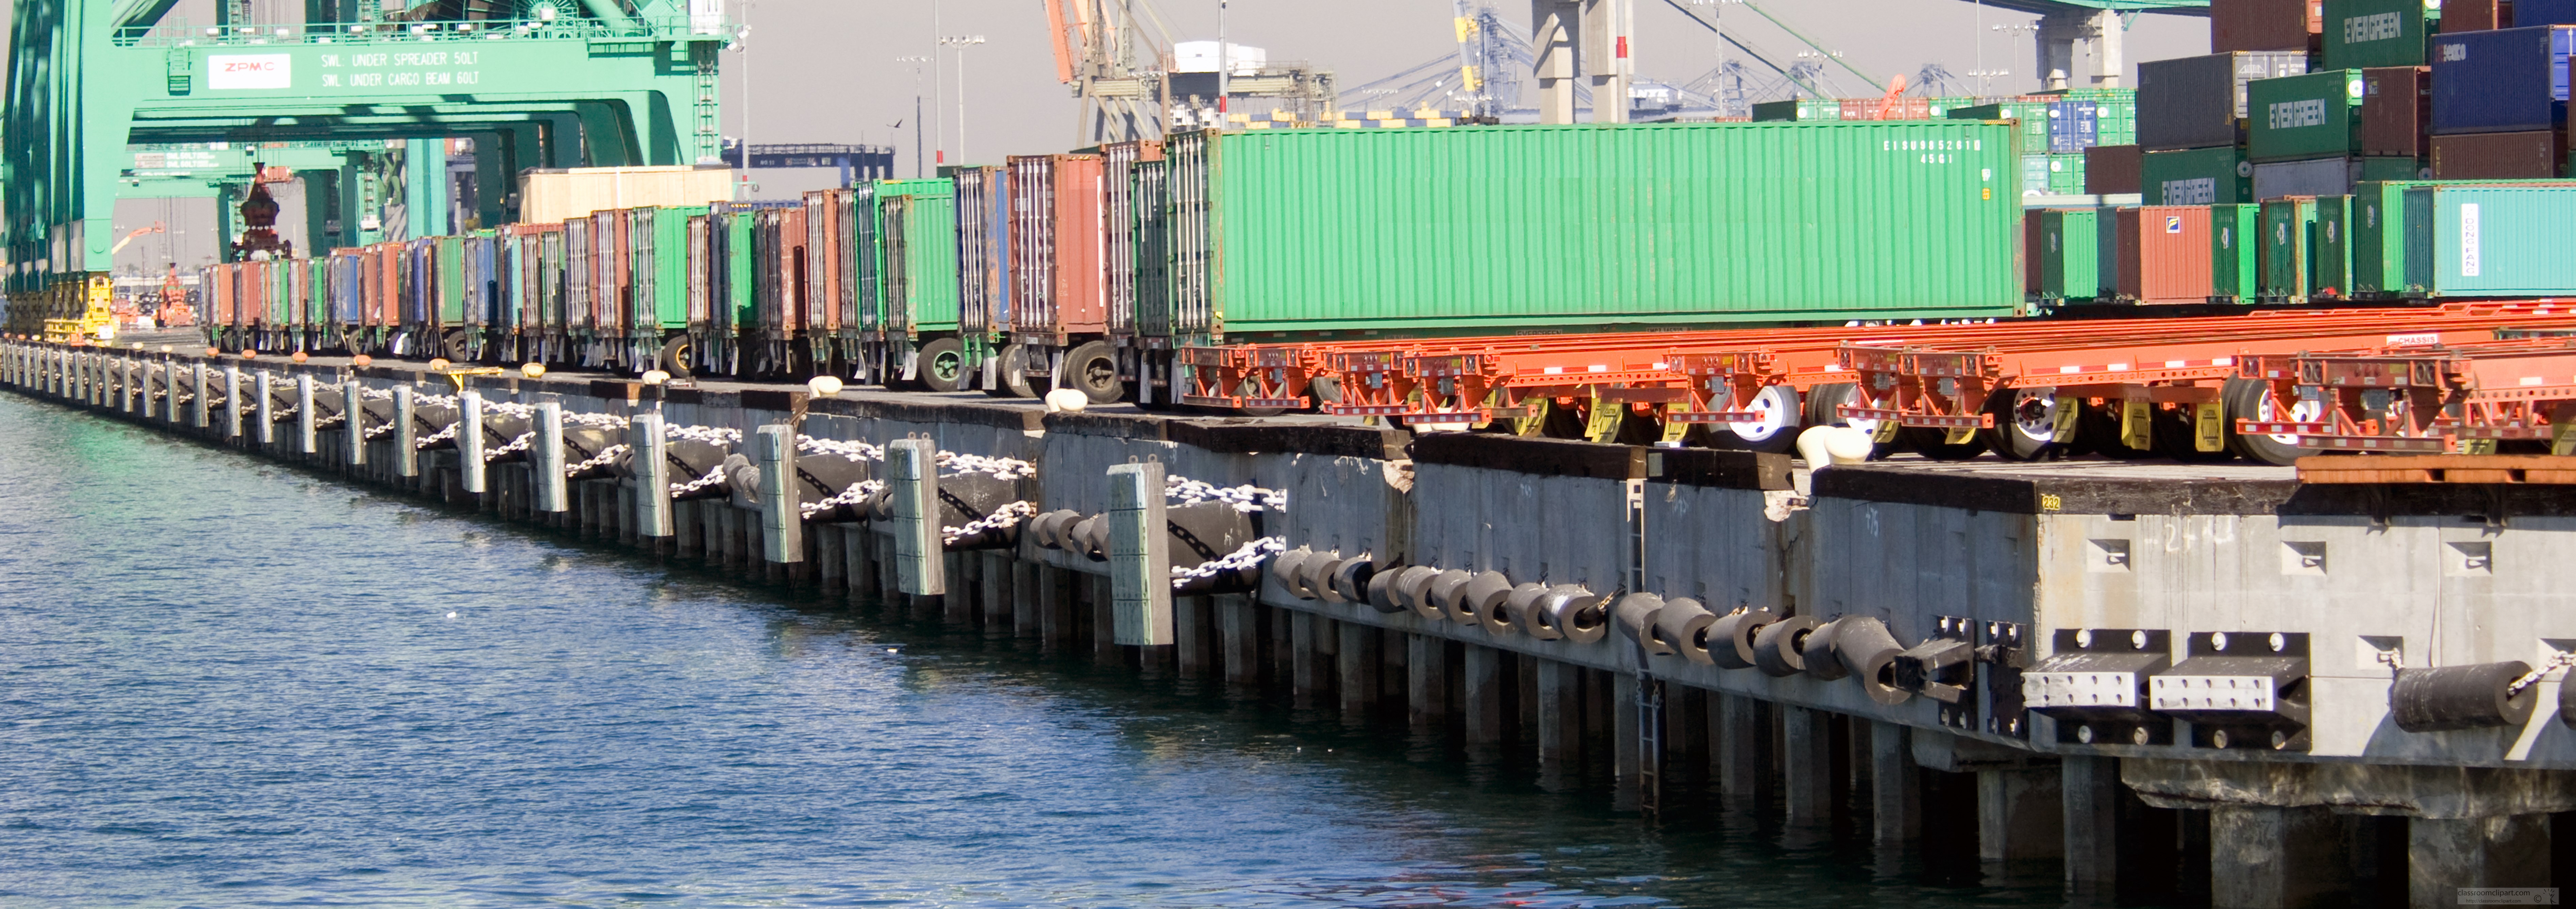 containers-lined-up-along-wharf-in-harbor.jpg